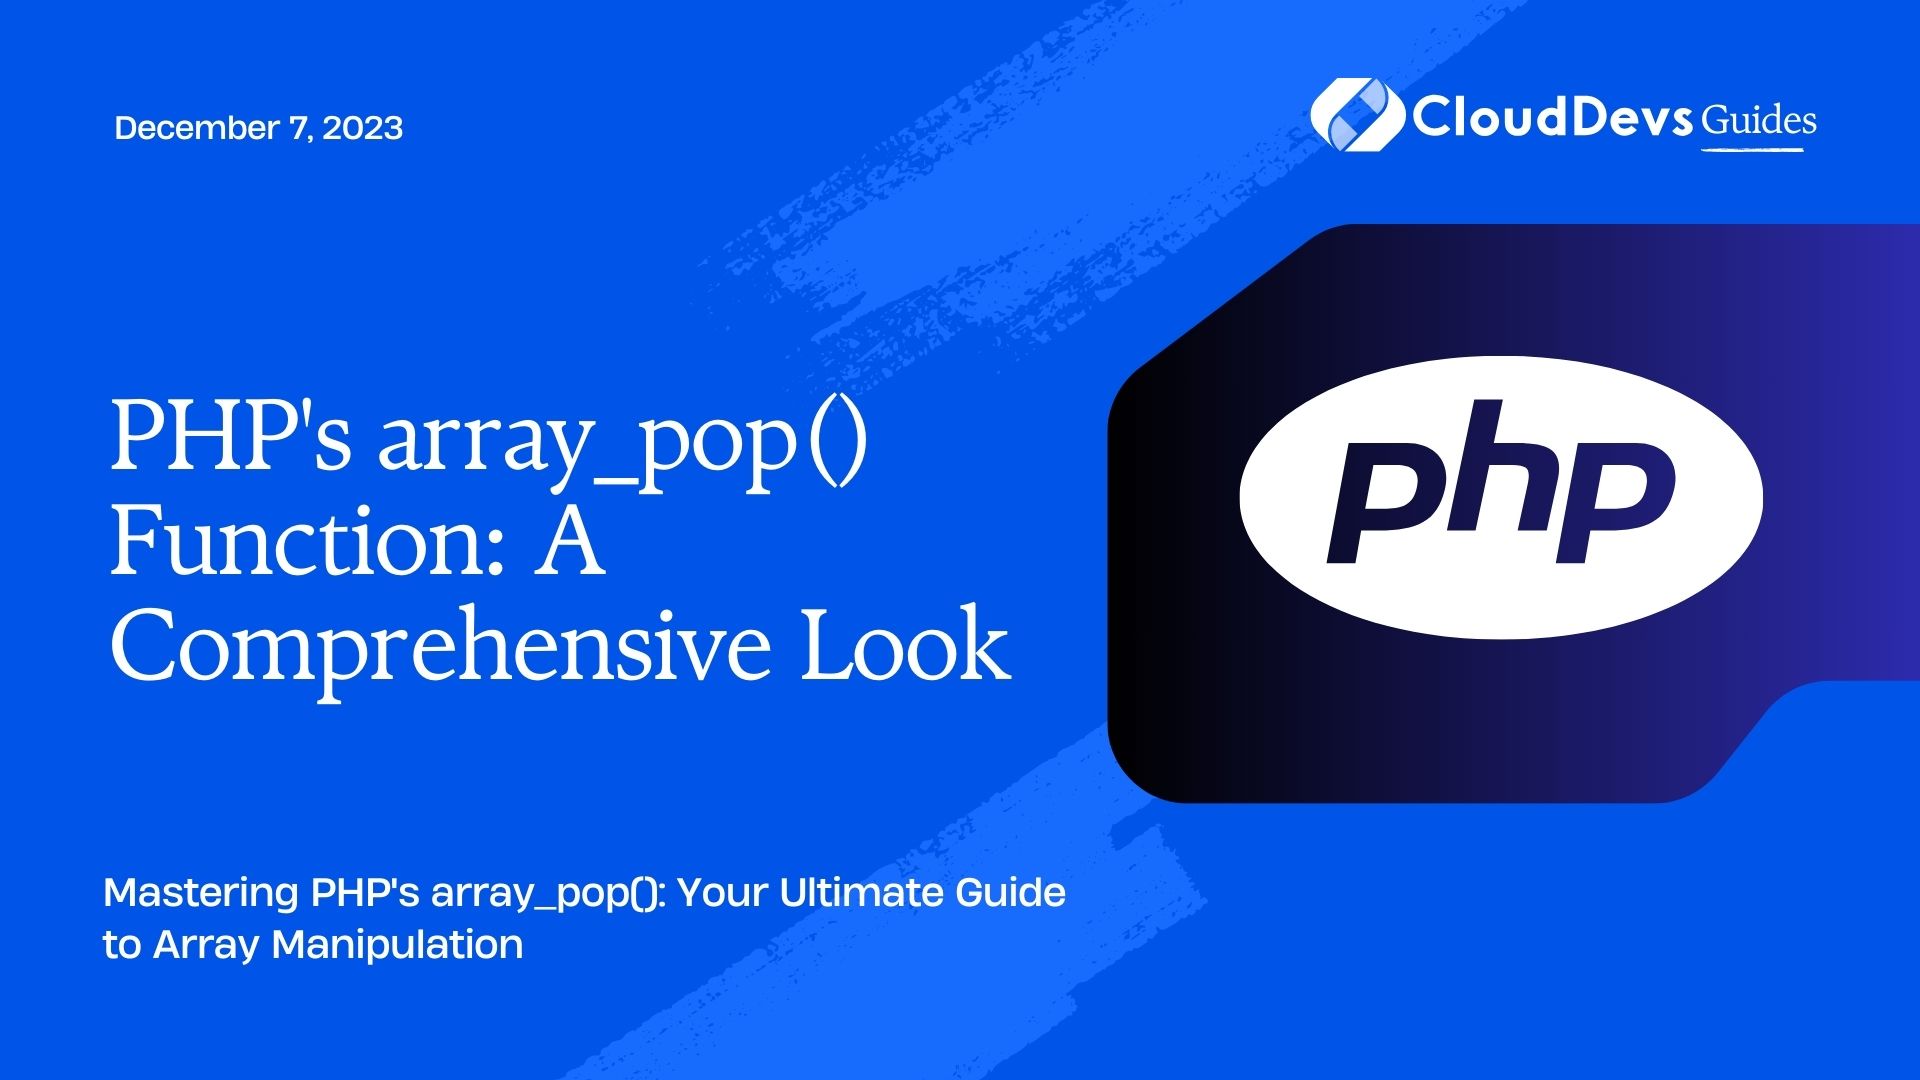 PHP's array_pop() Function: A Comprehensive Look